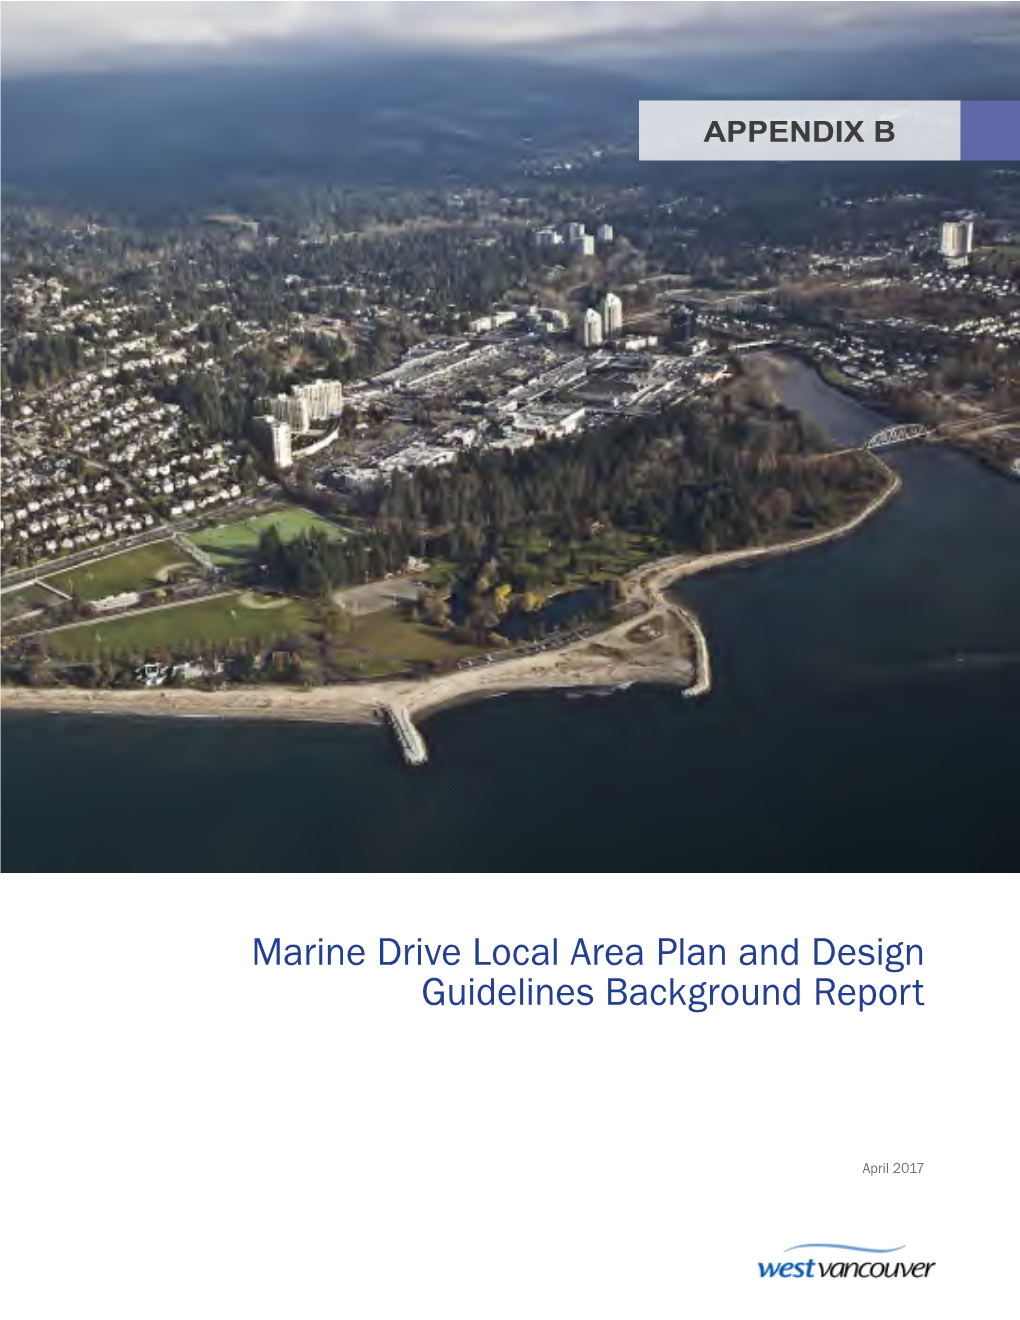 Marine Drive Local Area Plan and Design Guidelines Background Report